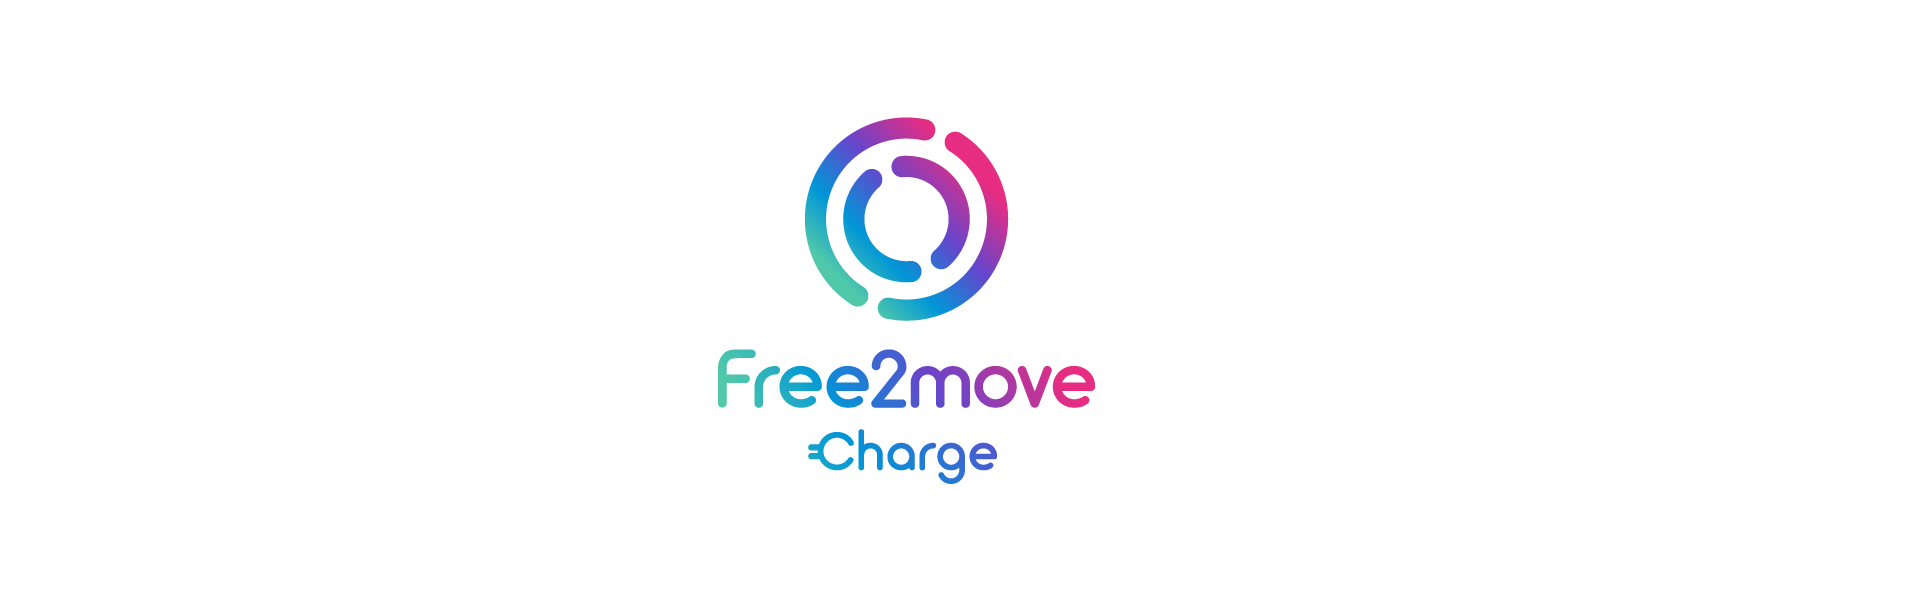 Free2move Charge Logo